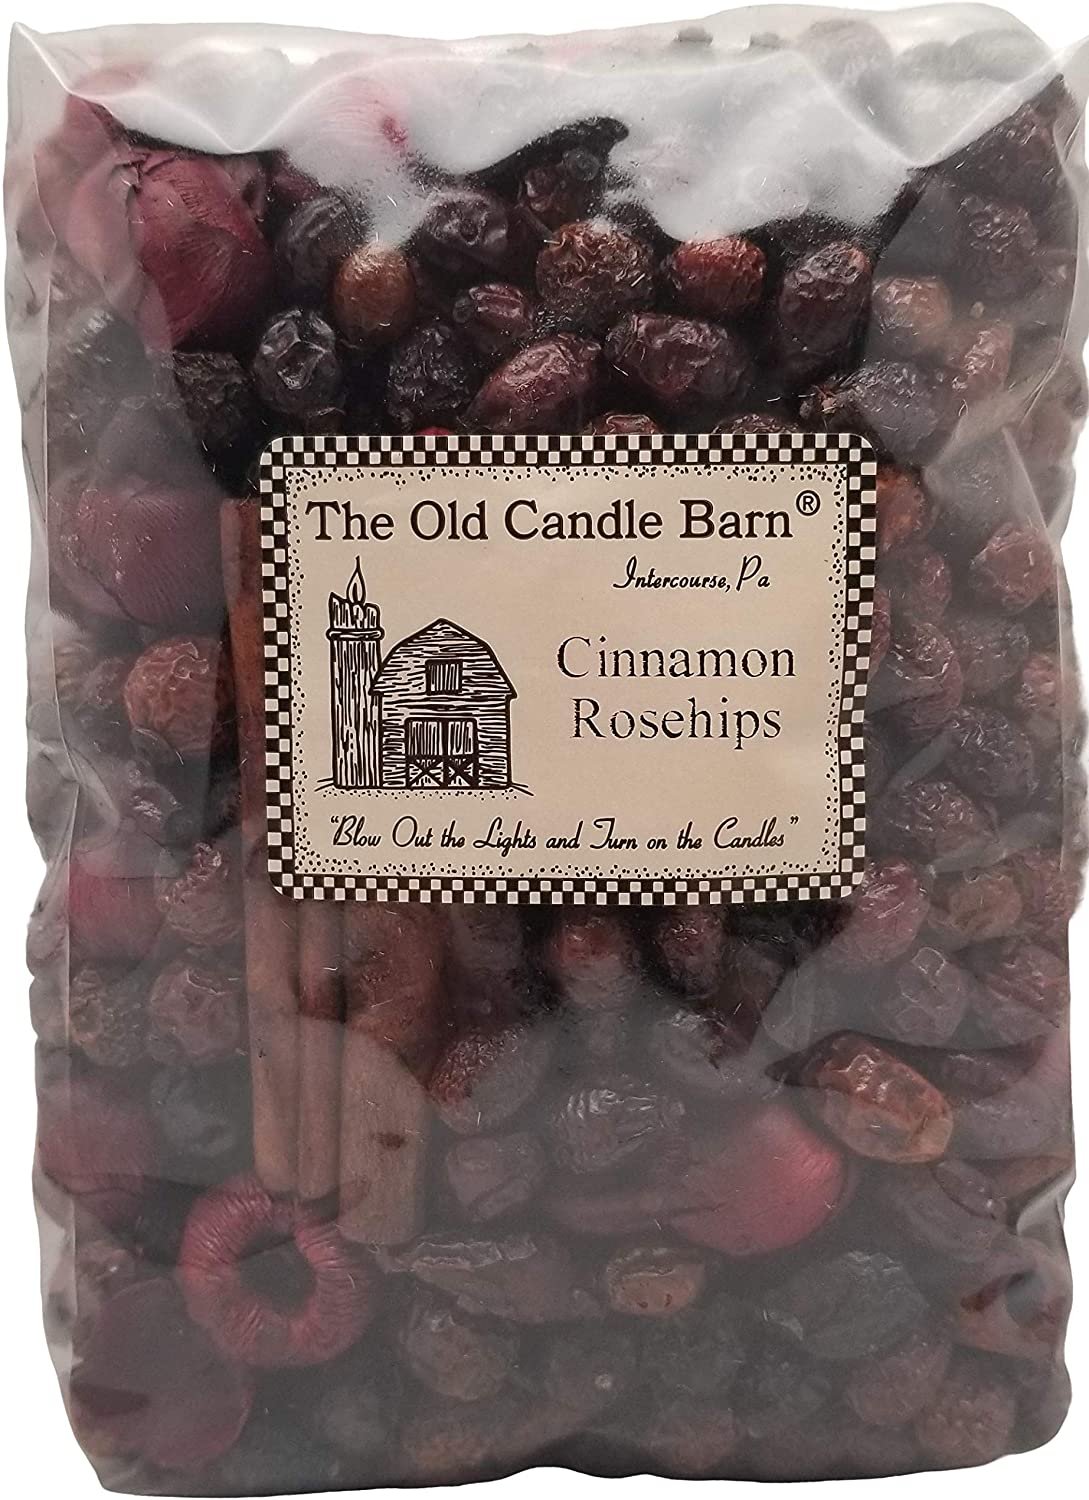 Old Candle Barn Cinnamon Rosehips Large Bag - Well Scented Potpourri - Made in USA